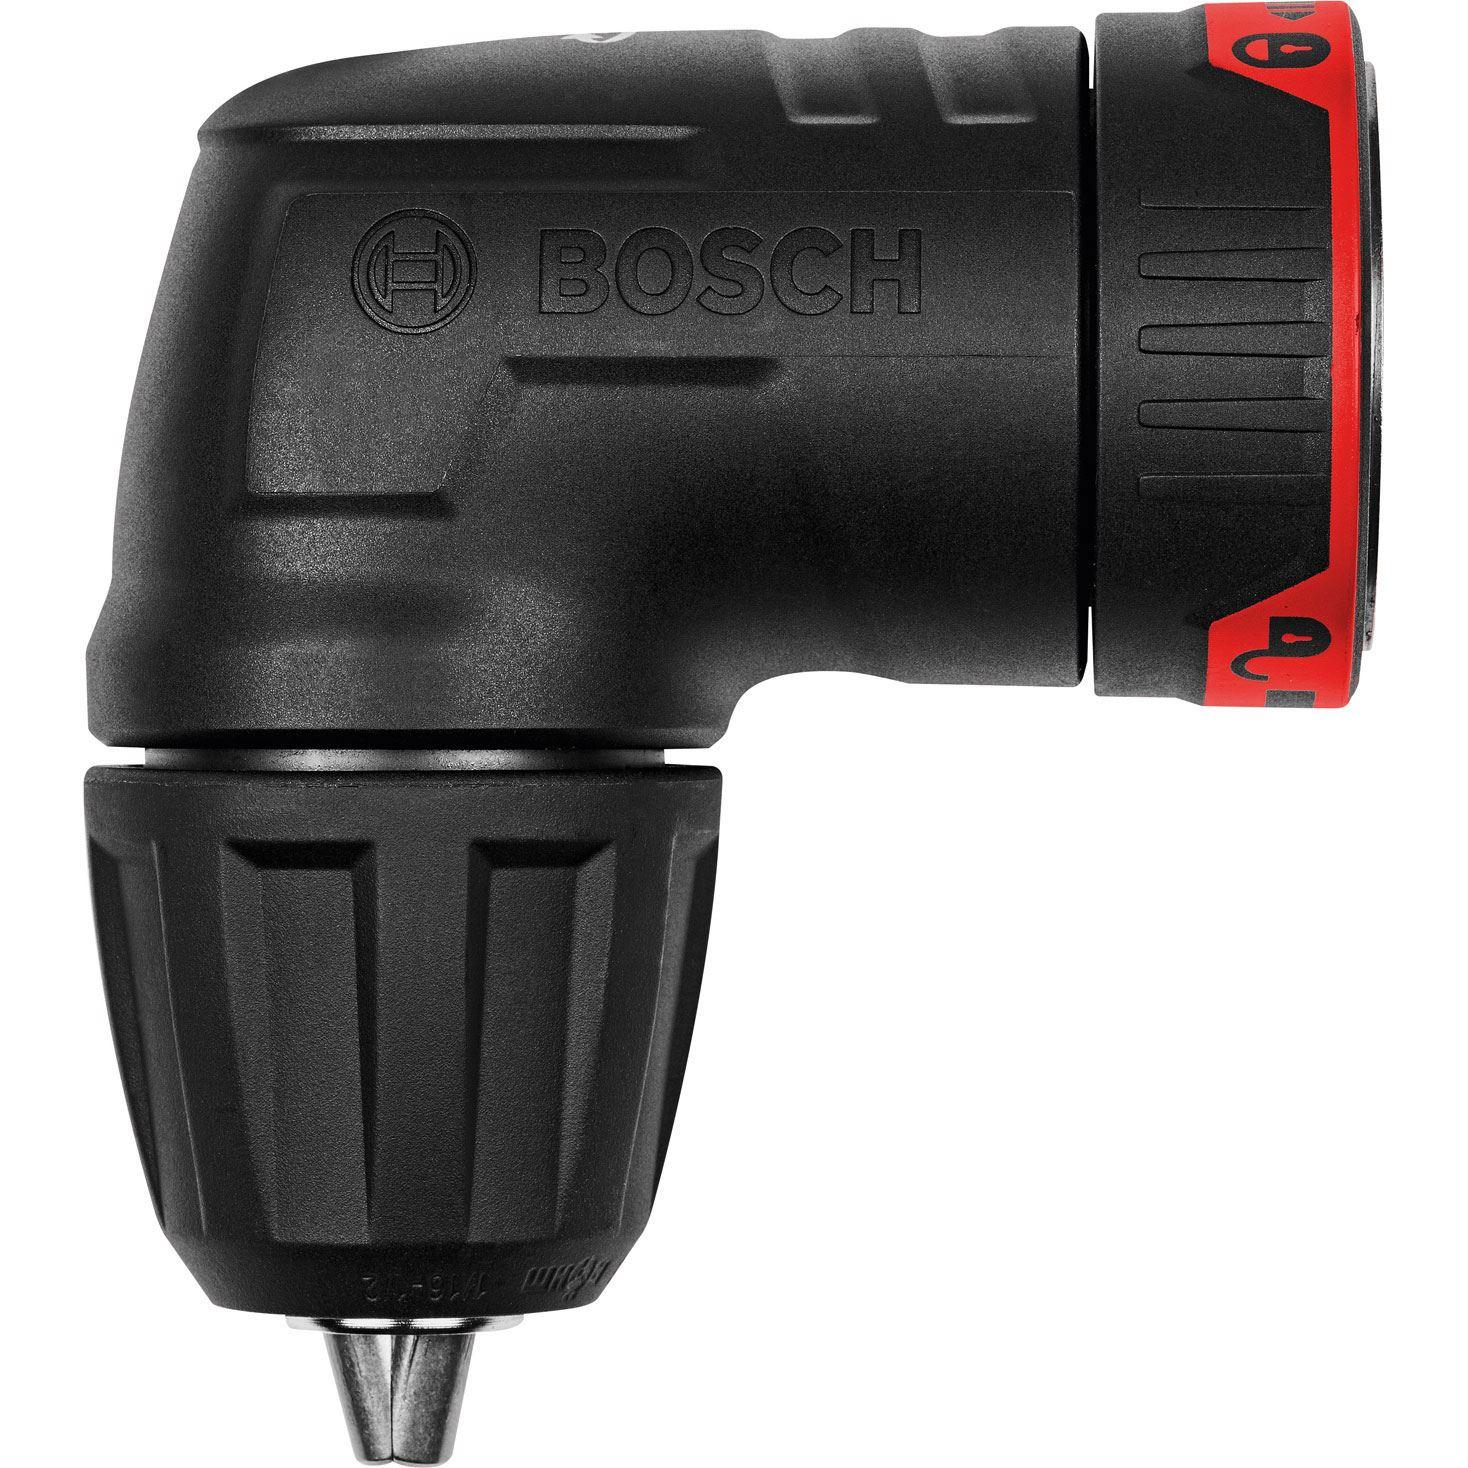 Selected image for BOSCH Nastavak FlexiClick GWA FC2 1600A001SK